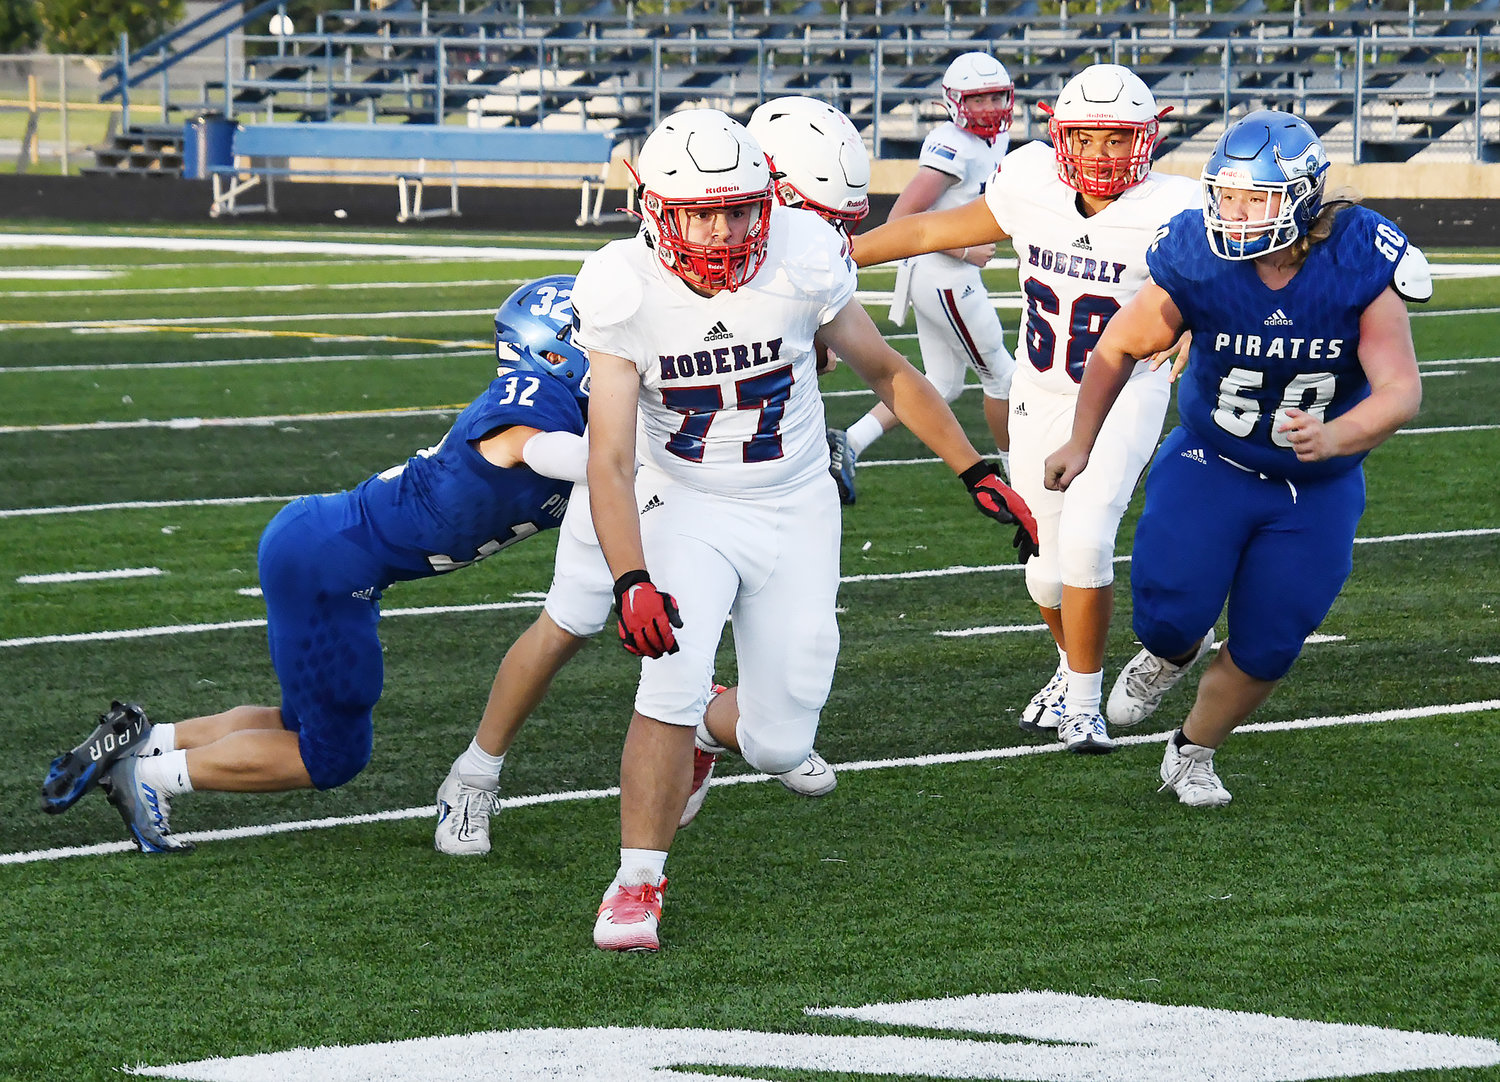 Moberly offensive lineman Isaac Stoneking enters what's called "the second level" preparing for another block while